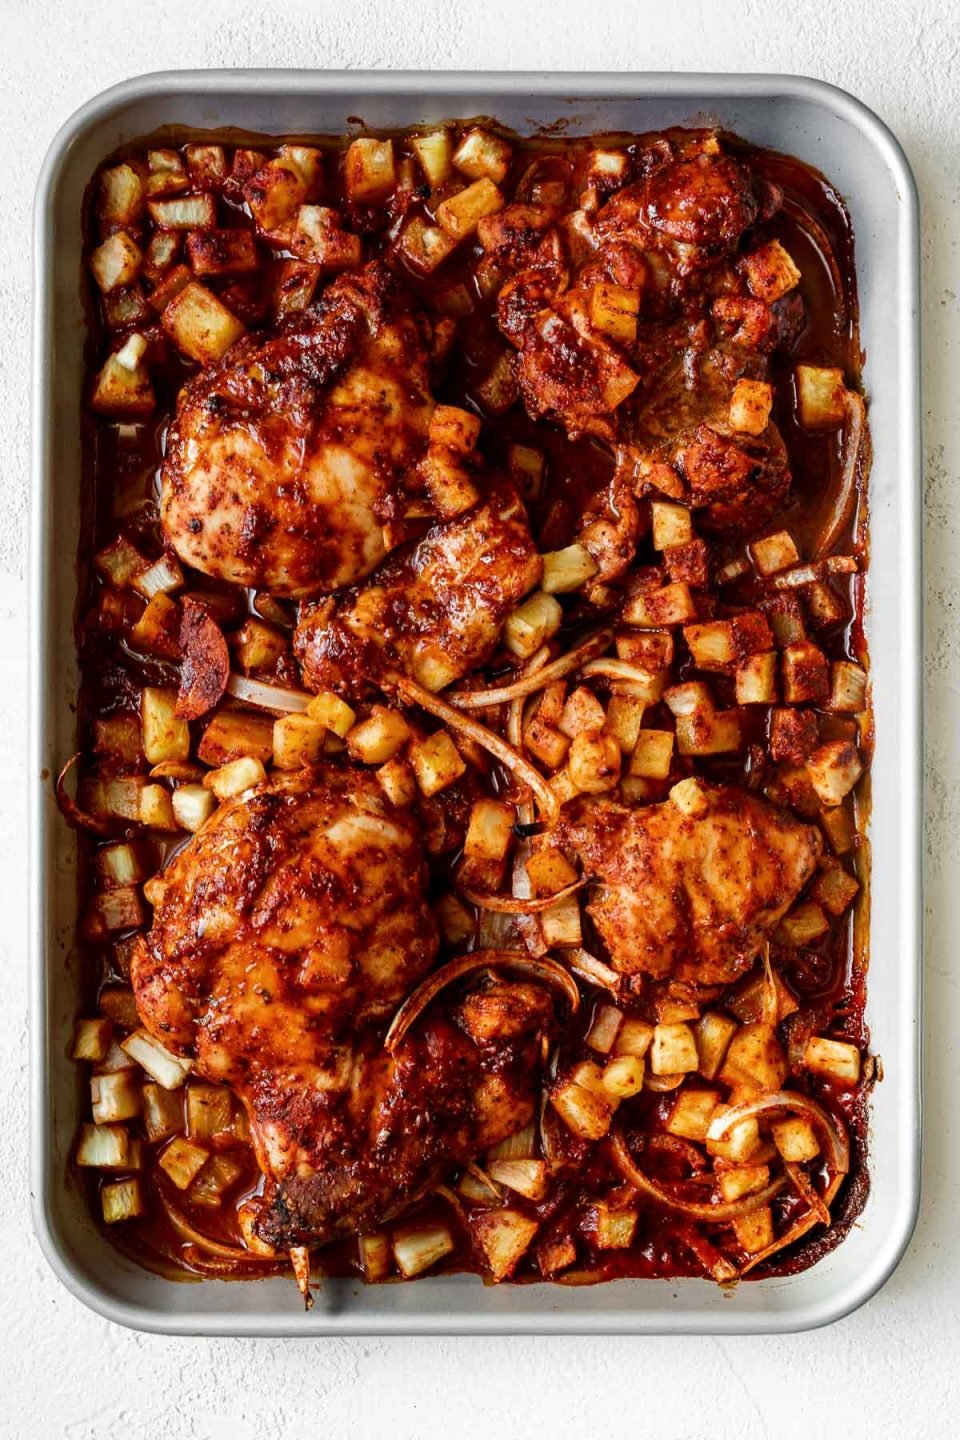 Baked al pastor chicken thighs & sliced onion on a silver quarter baking sheet with finely diced pineapple. The sheet pan sits atop a white plaster surface.